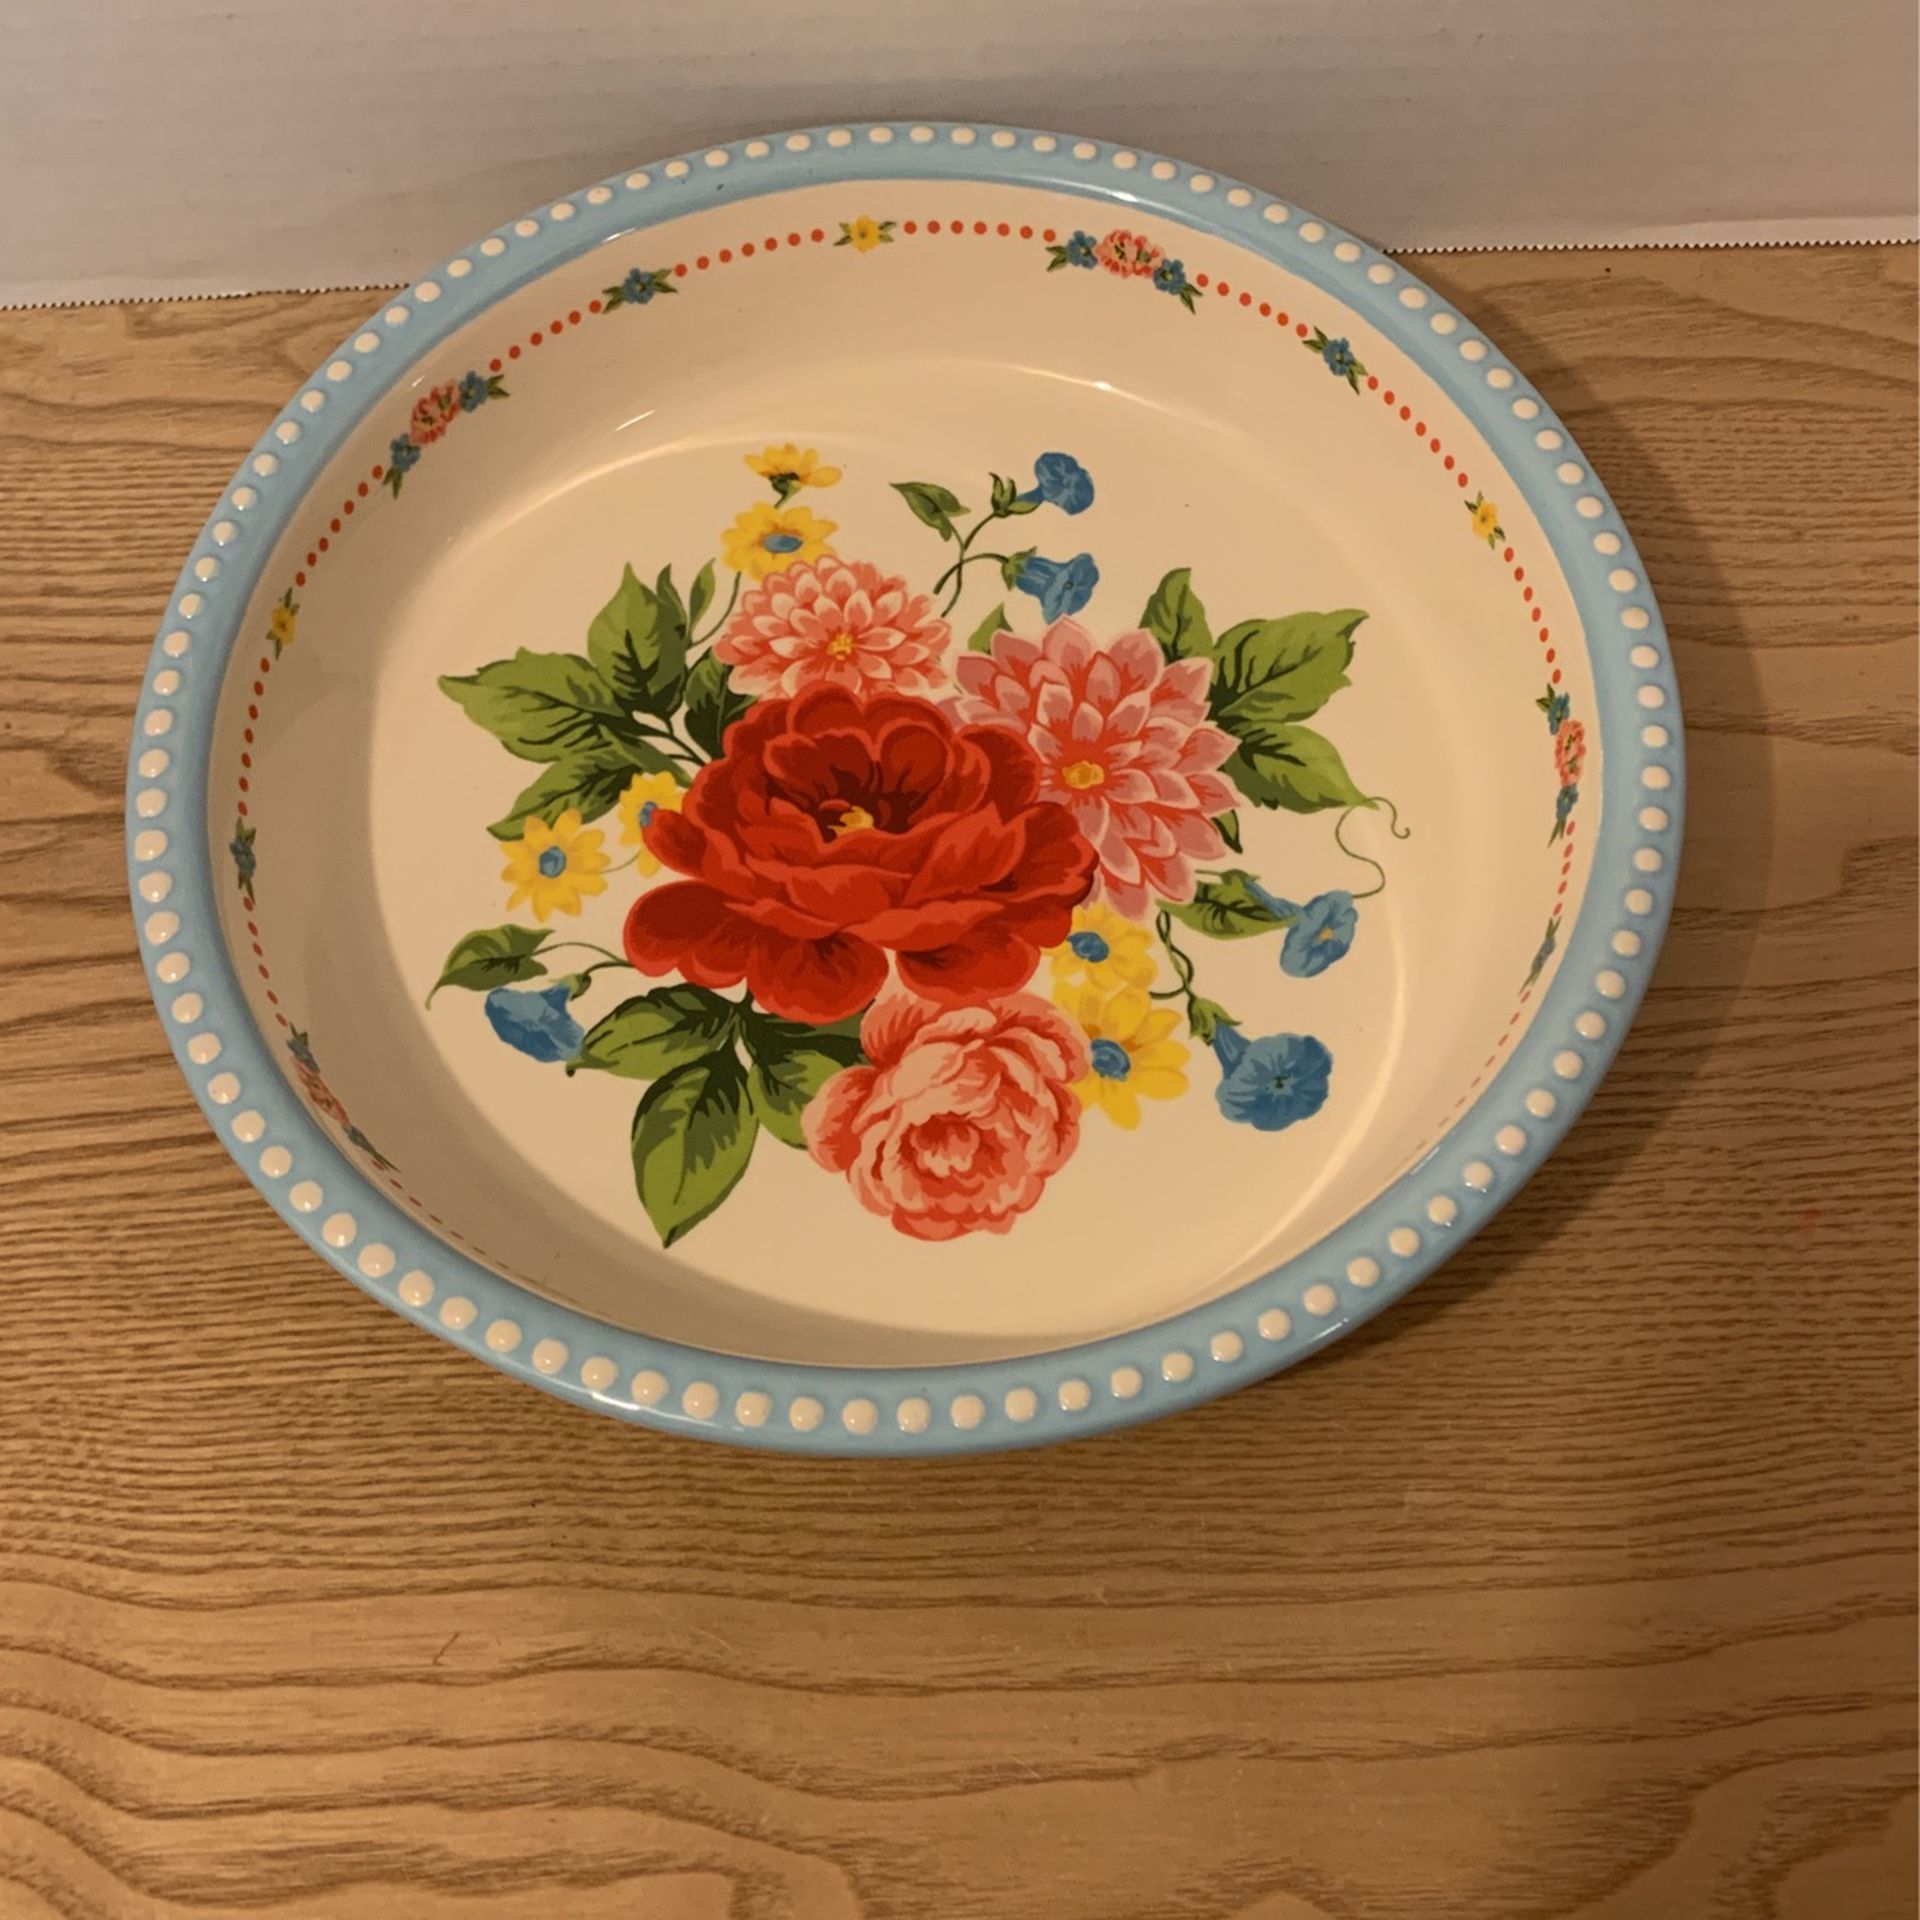 Pioneer Woman, Sweet, Rose Baking Pie Dish, 10 Inches B27 for Sale in  Litchfield, CT - OfferUp